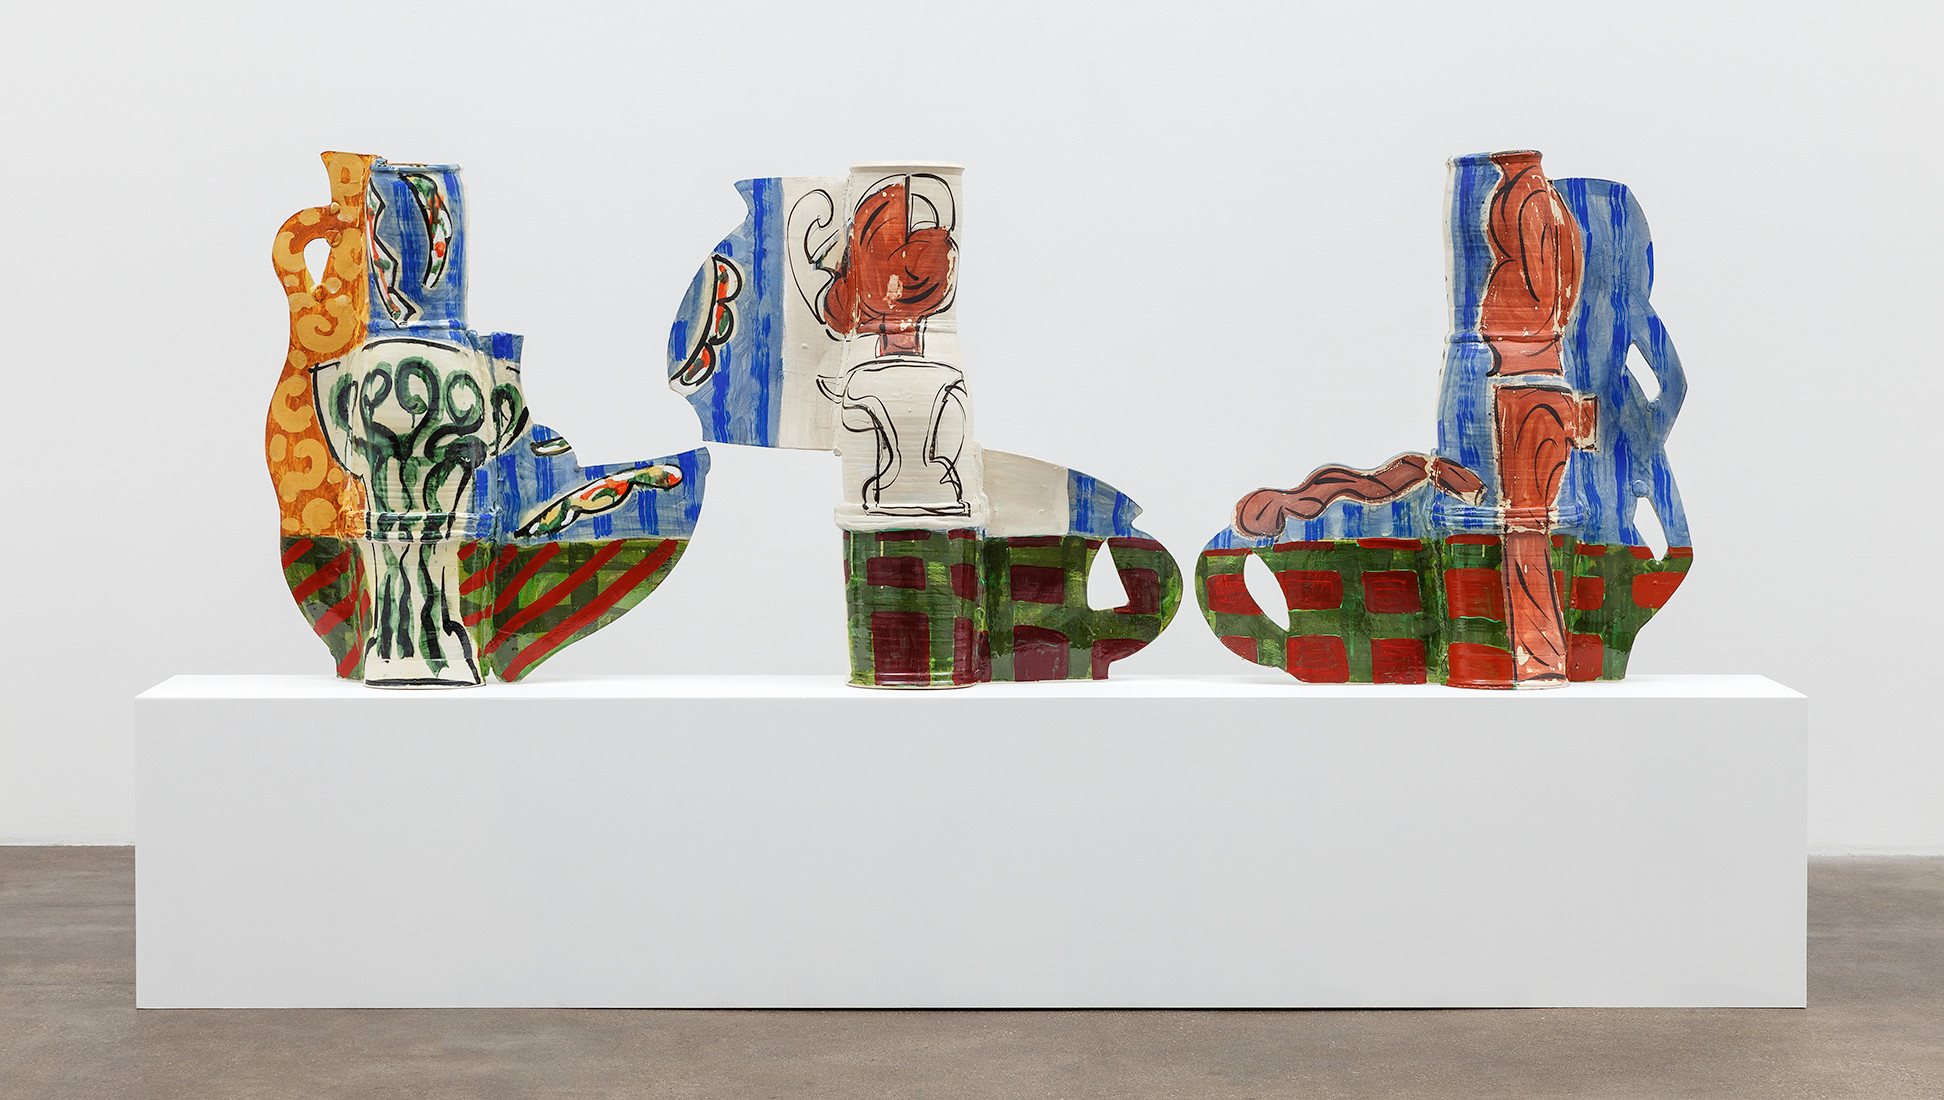 susan paley vases of david kordansky gallery inside vases and girls 2010 alternate view glazed earthenware 33 x 93 x 8 1 2 inches 83 8 x 236 2 x 21 6 cm